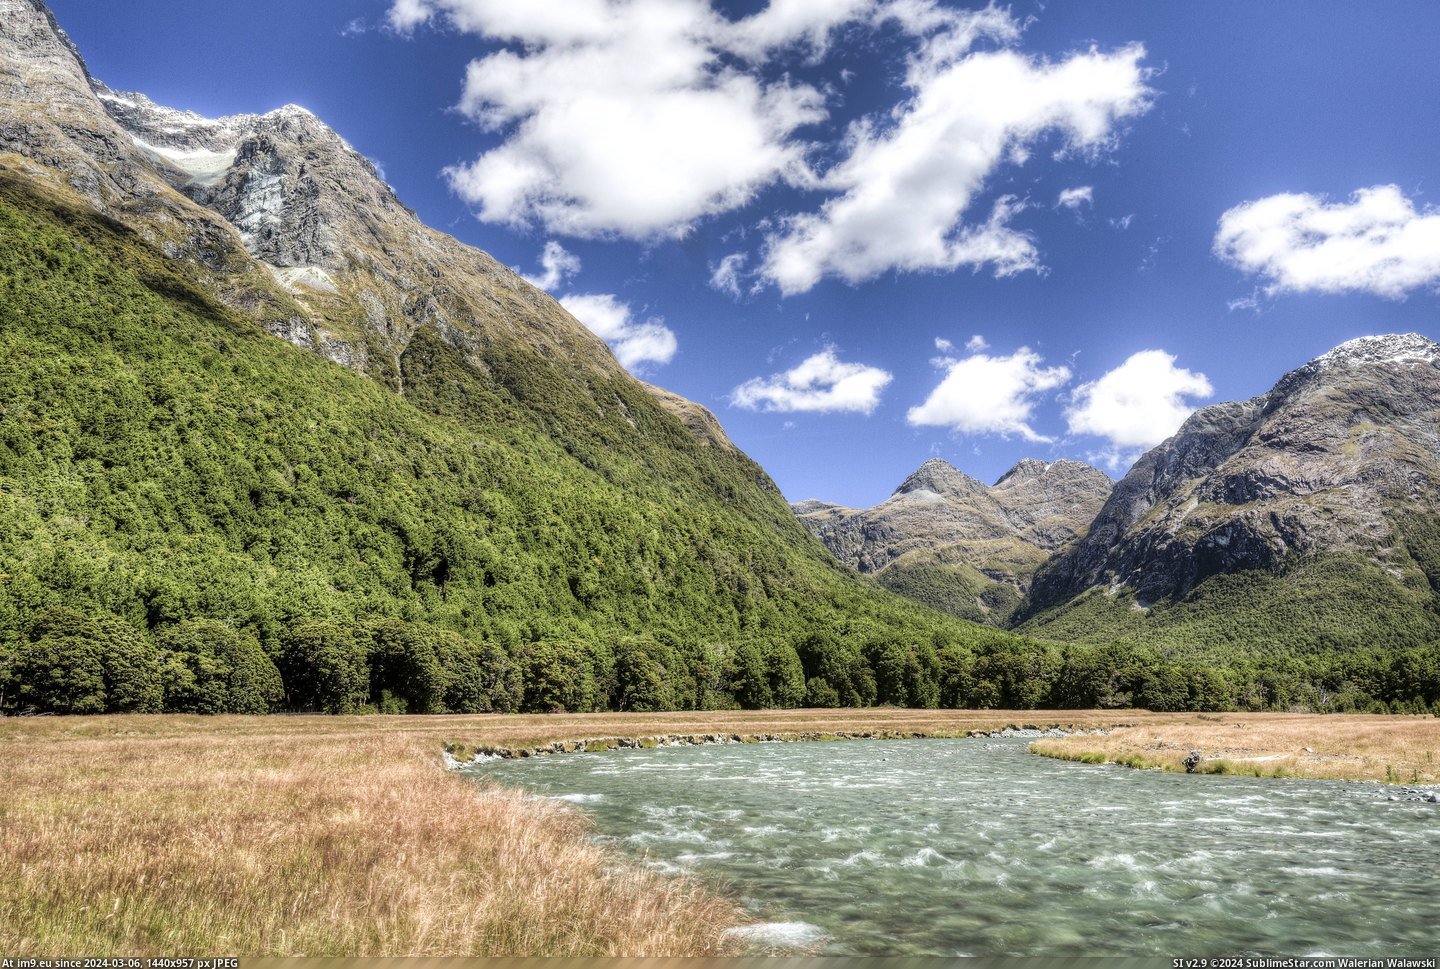 #One #Park #National #Mountains #Eye #Fiordland #Valley #River #Forest [Earthporn] River, Grassland, Forest, and Mountains of the Caples Valley, Fiordland National Park  [5558x3704] [One Lidless Eye] Pic. (Image of album My r/EARTHPORN favs))